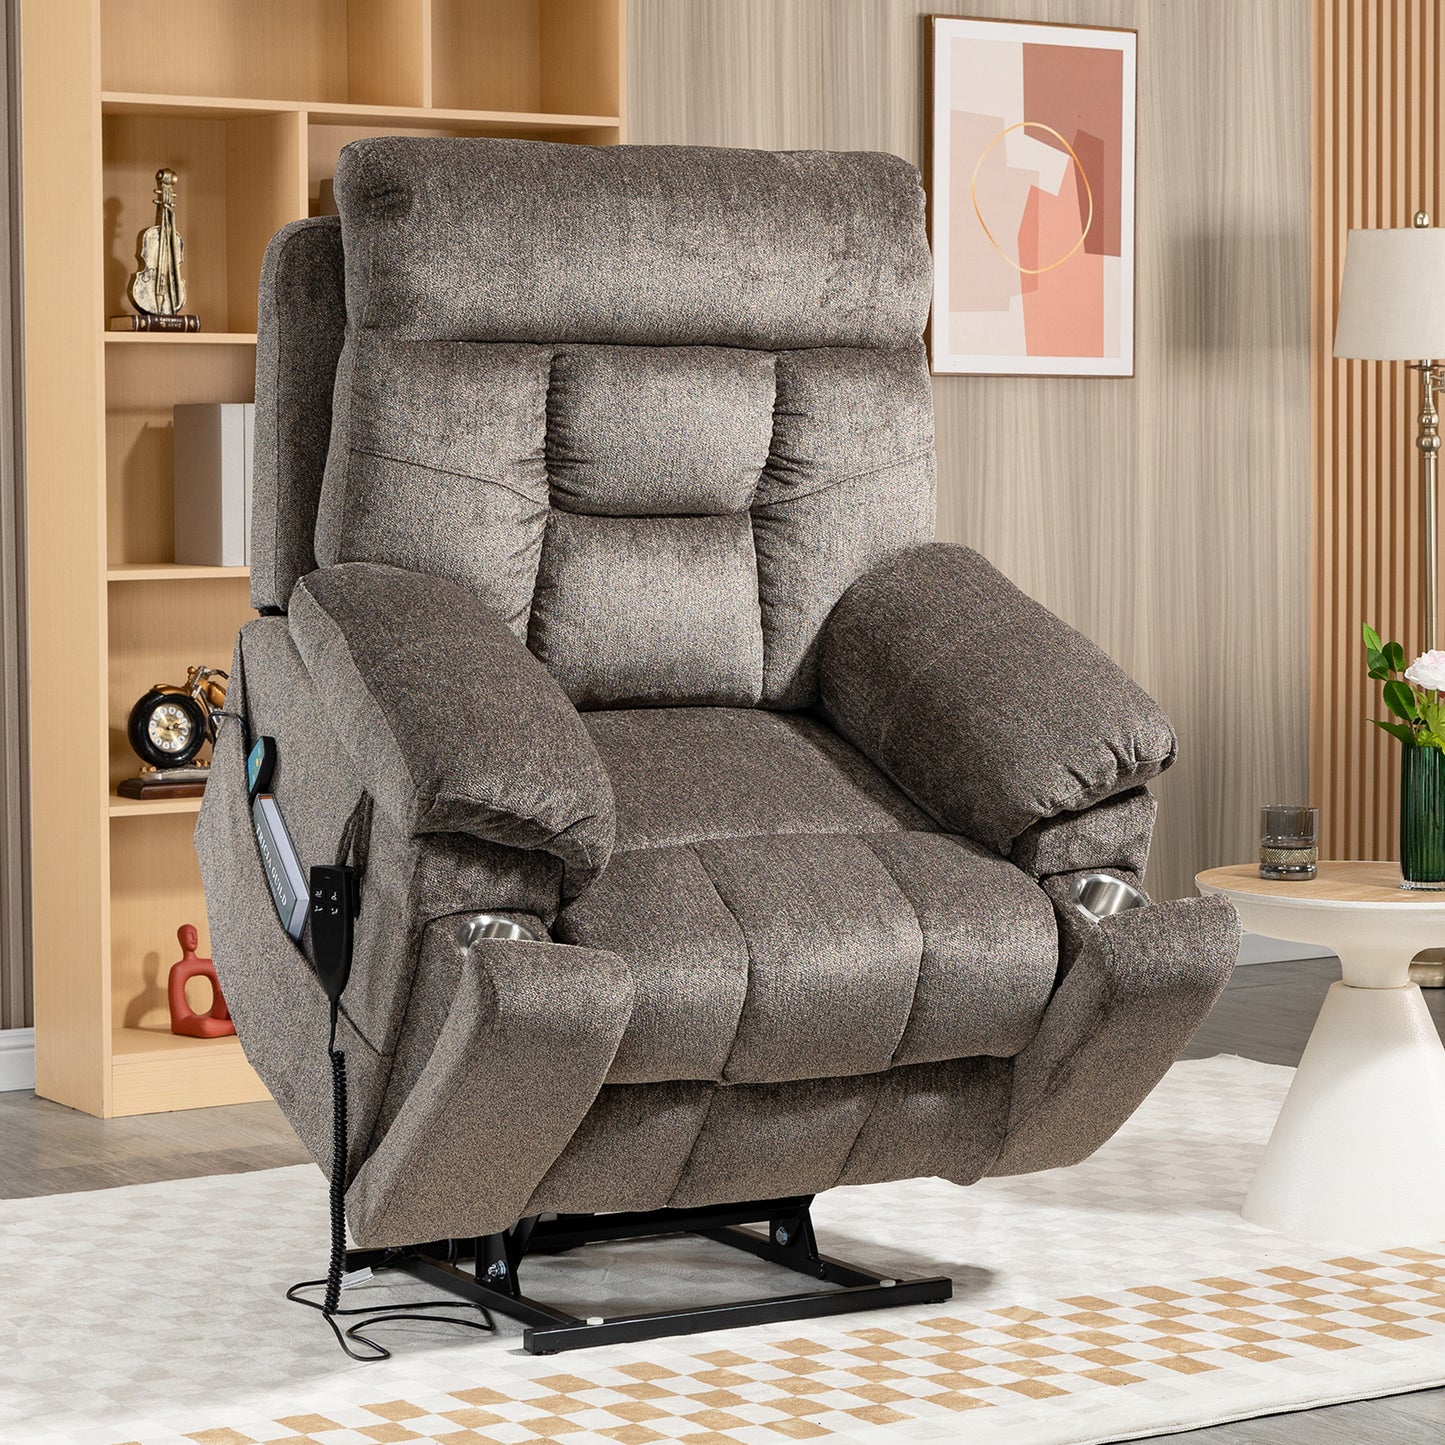 SYNGAR Large Power Lift Chair Recliner Oversized for Elderly, Heavy Duty Electric Lift Recliner with Heat Therapy and Massage, 180 Degrees Lying Flat Recliner Sofa for Tall Men, Light Brown